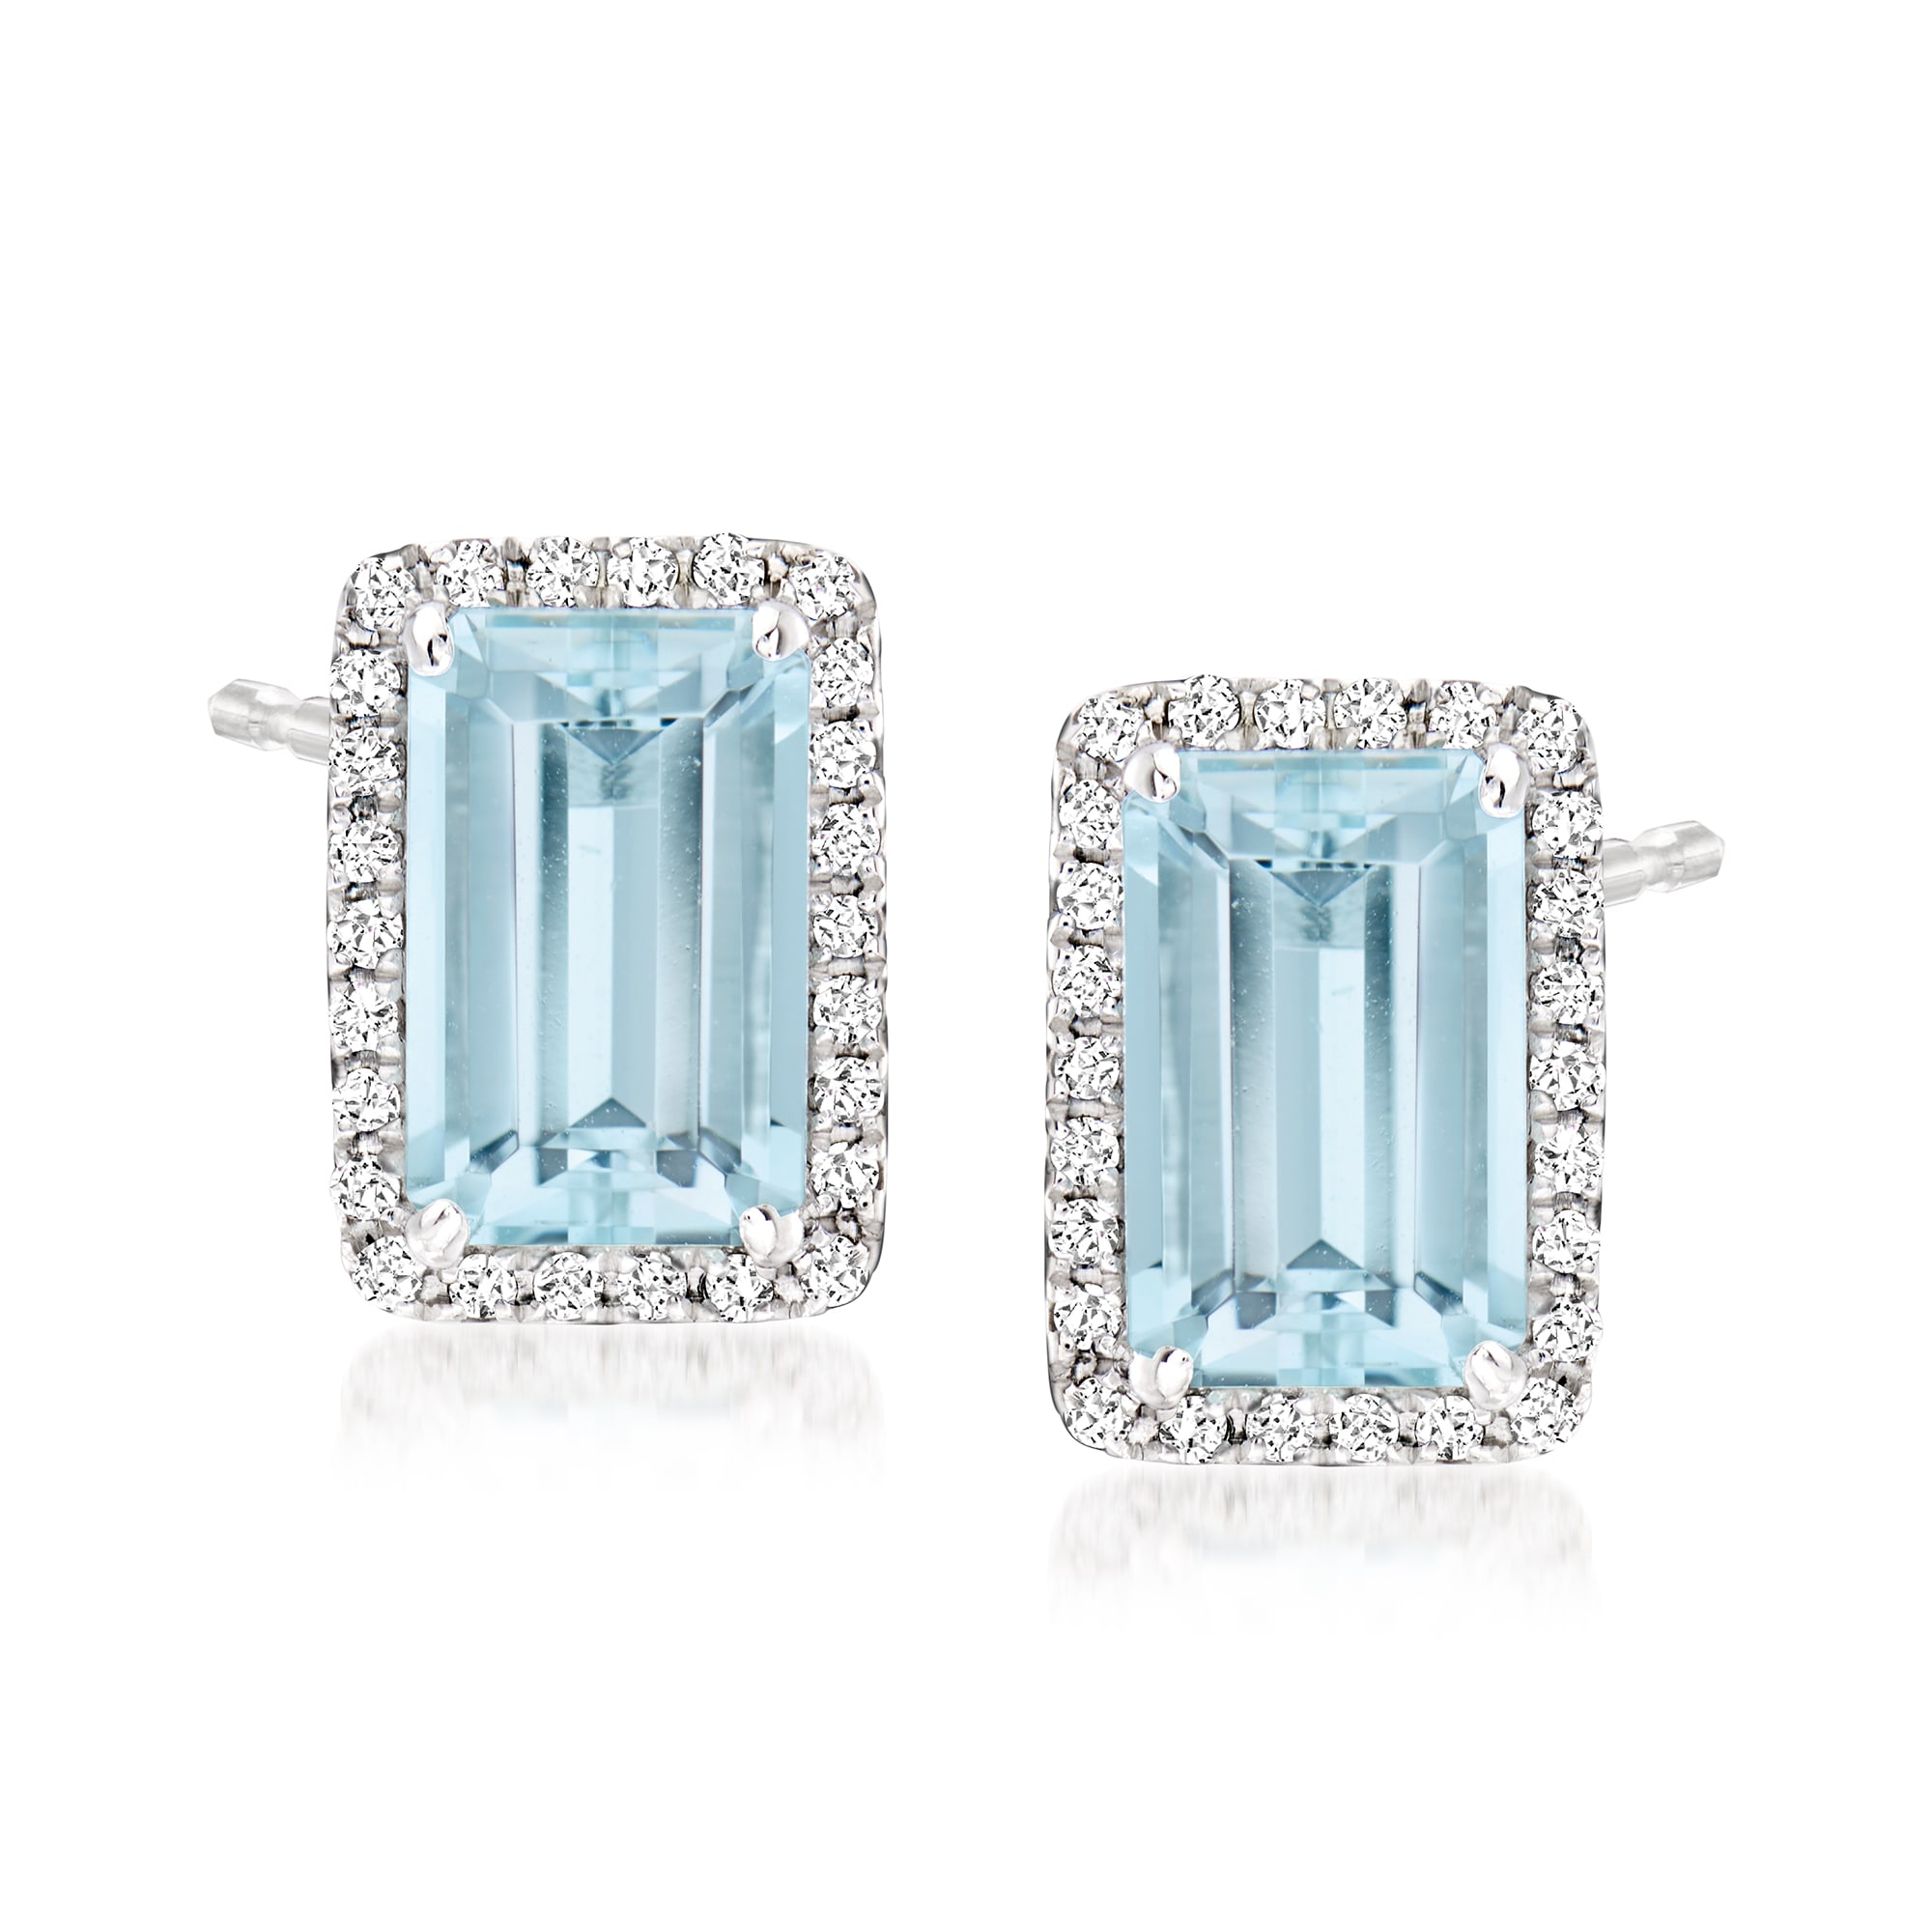 2.50 ct. t.w. Aquamarine and .18 ct. t.w. Diamond Earrings in 14kt ...